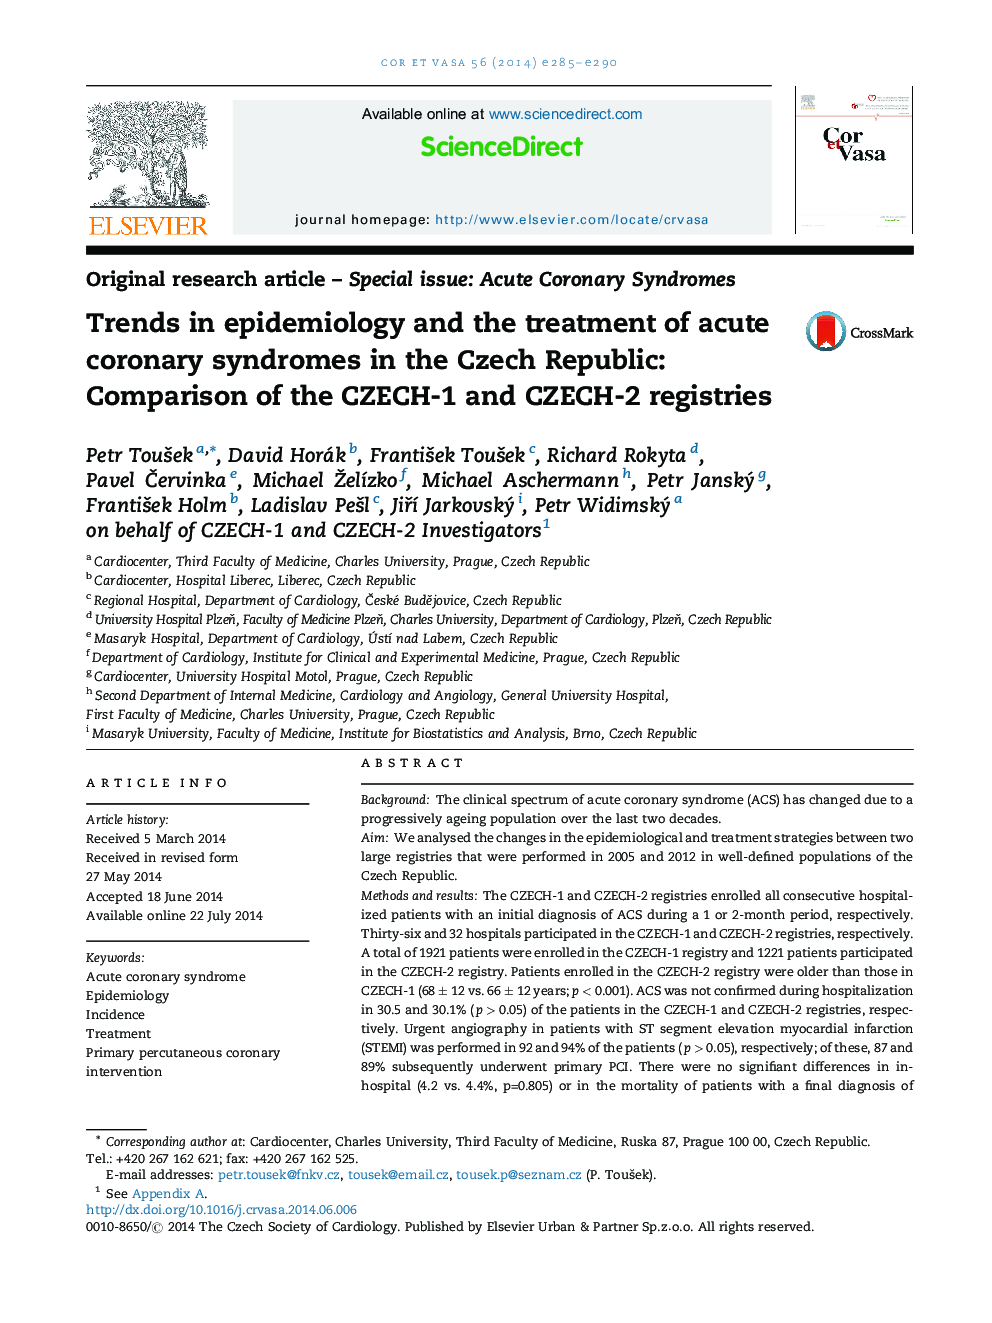 Trends in epidemiology and the treatment of acute coronary syndromes in the Czech Republic: Comparison of the CZECH-1 and CZECH-2 registries